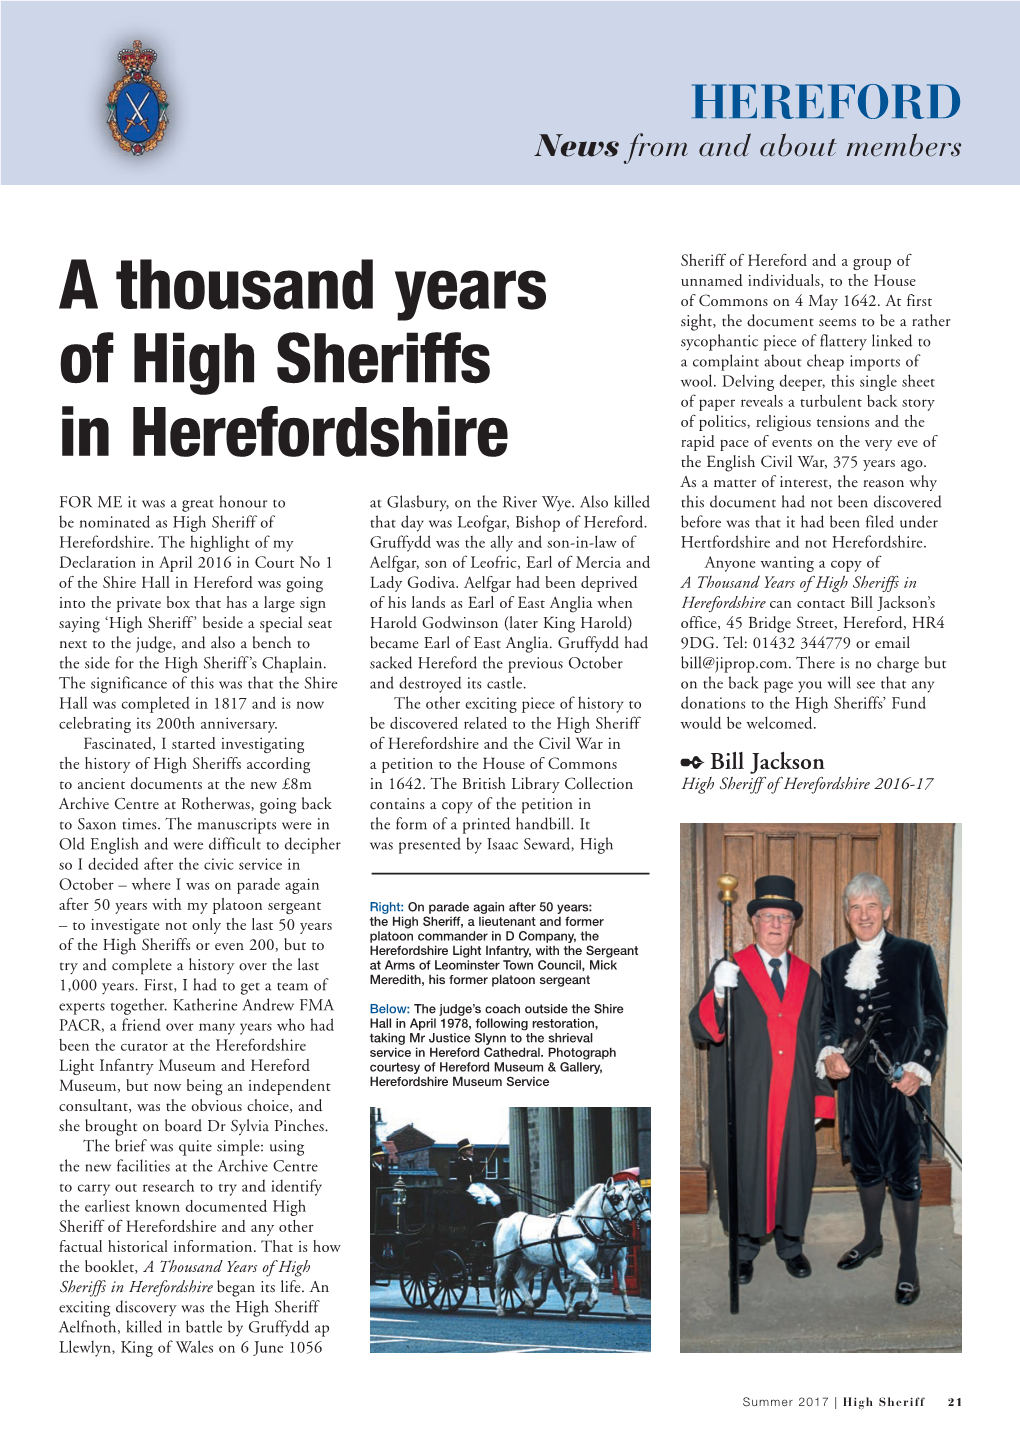 A Thousand Years of High Sheriffs in Herefordshire Began Its Life